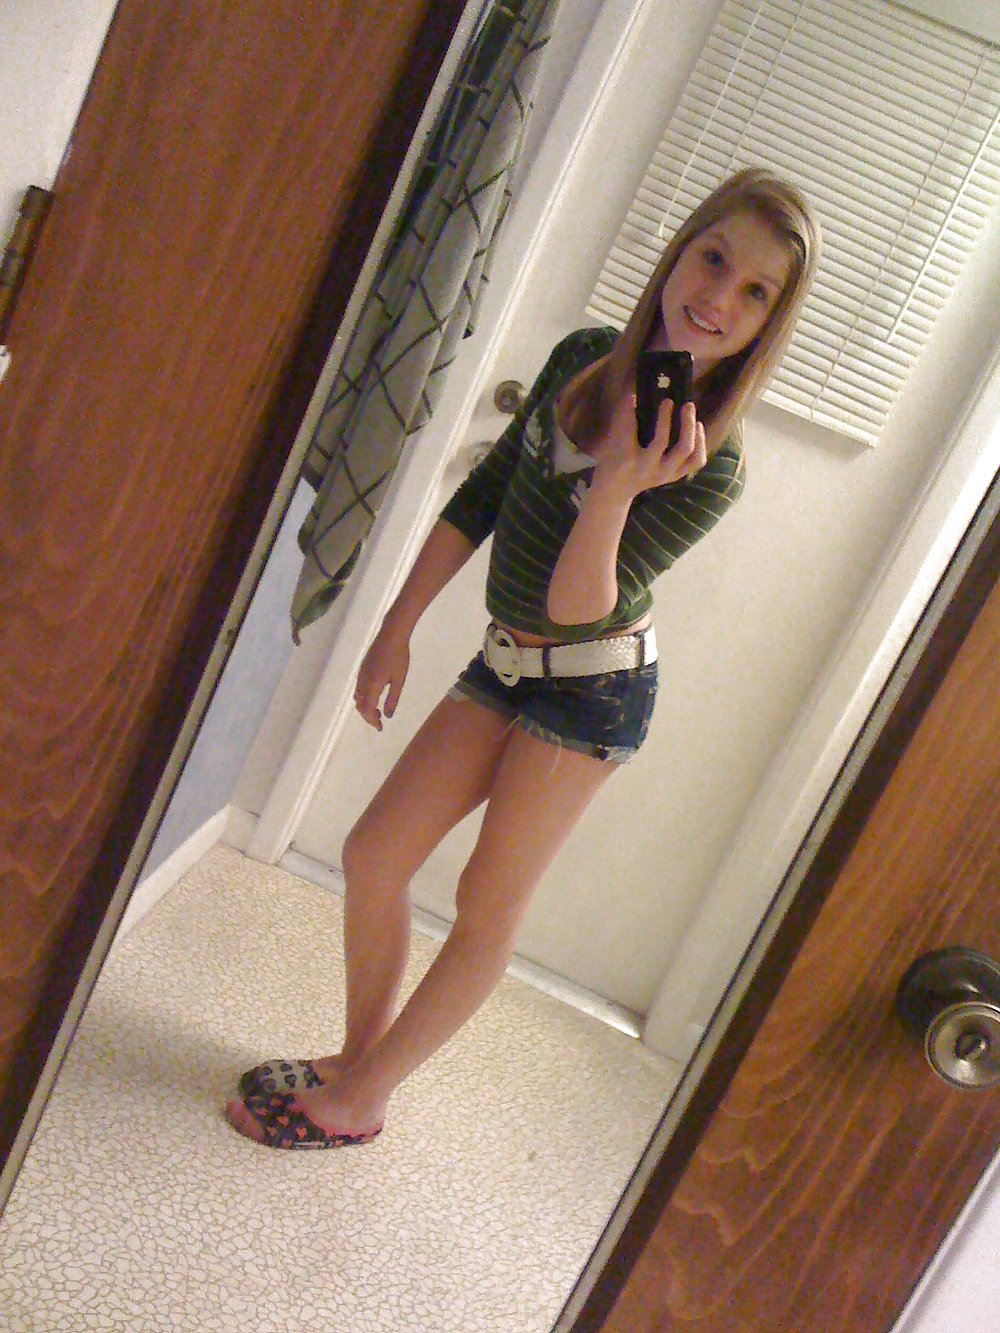 Sexy Teen Pictures & Self SHots 10 adult photos